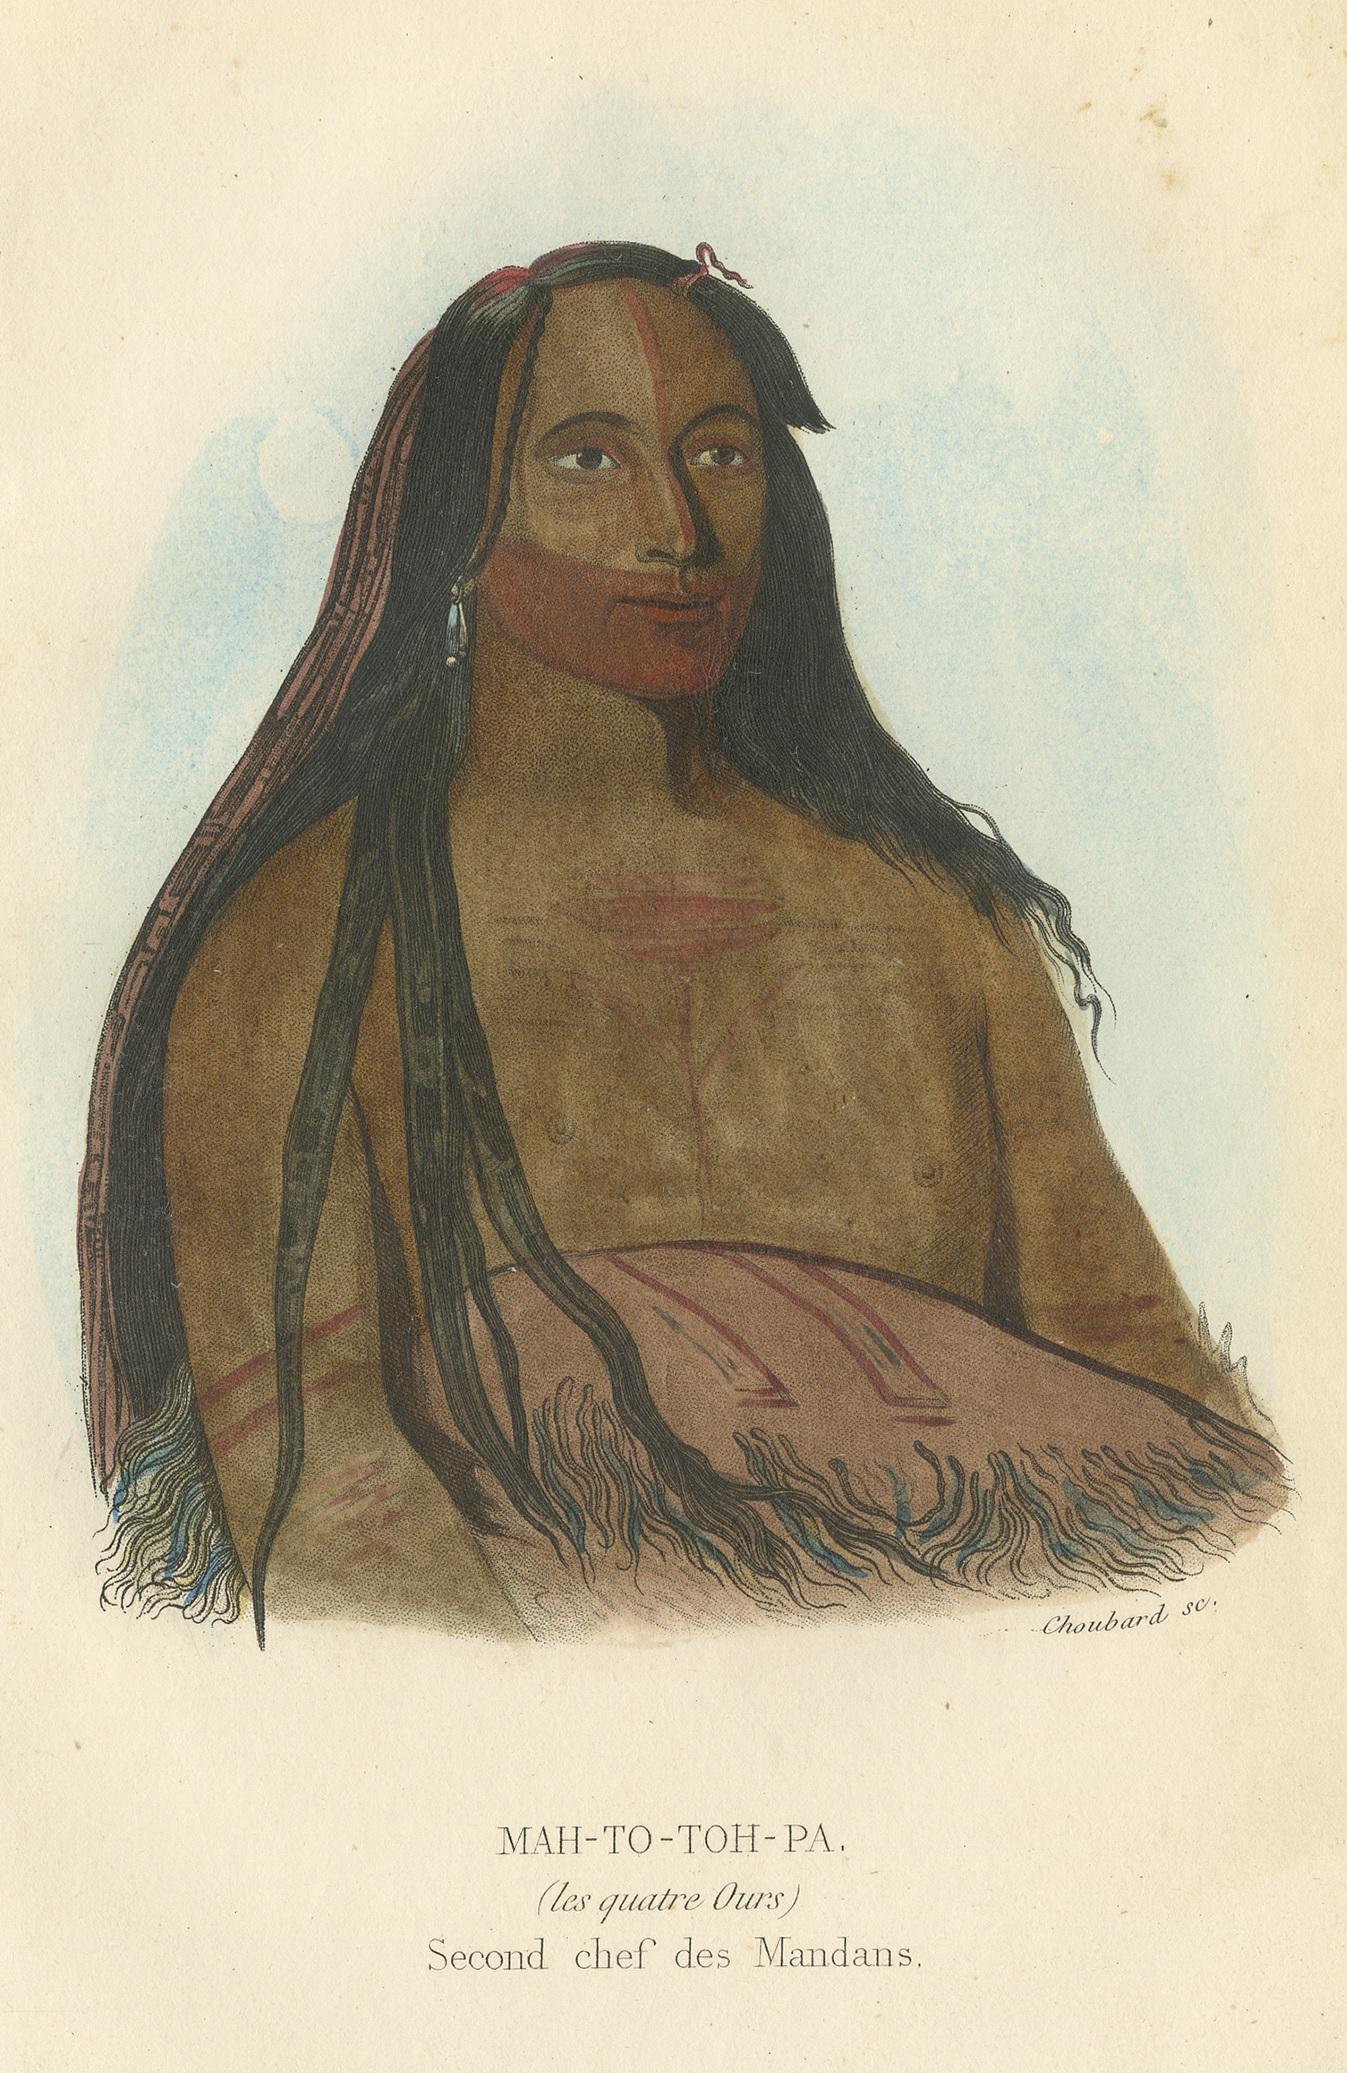 Antique print titled 'Mah-To-Toh-Pa'. Lithograph of the second Chief of the Mandan tribe. The Mandan are a Native American tribe of the Great Plains who have lived for centuries primarily in what is now North Dakota. This print originates from